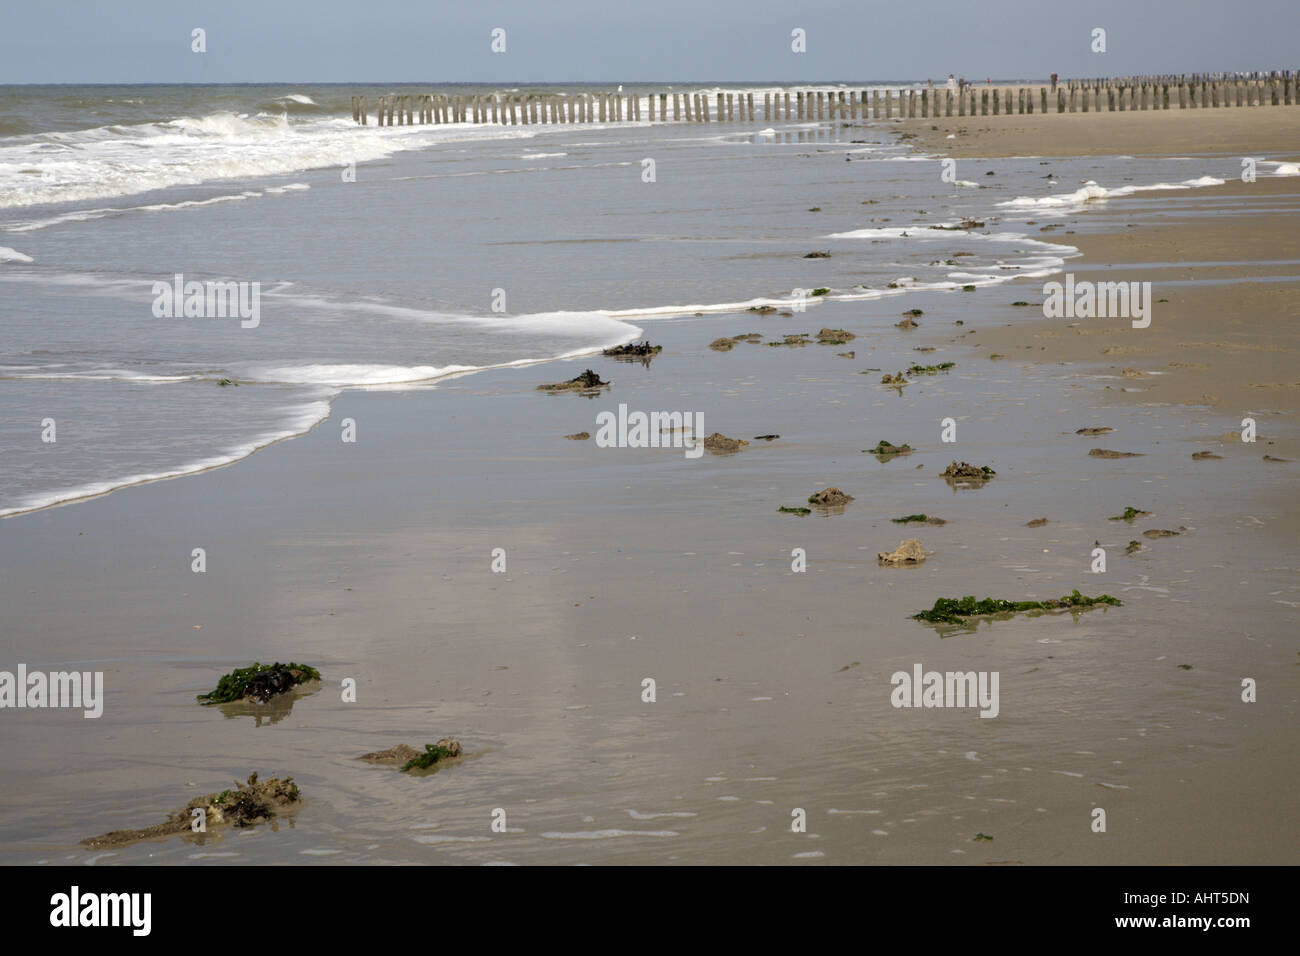 Sea weed washed up on a beach, Haamstede, Zealand, Netherlands Stock Photo